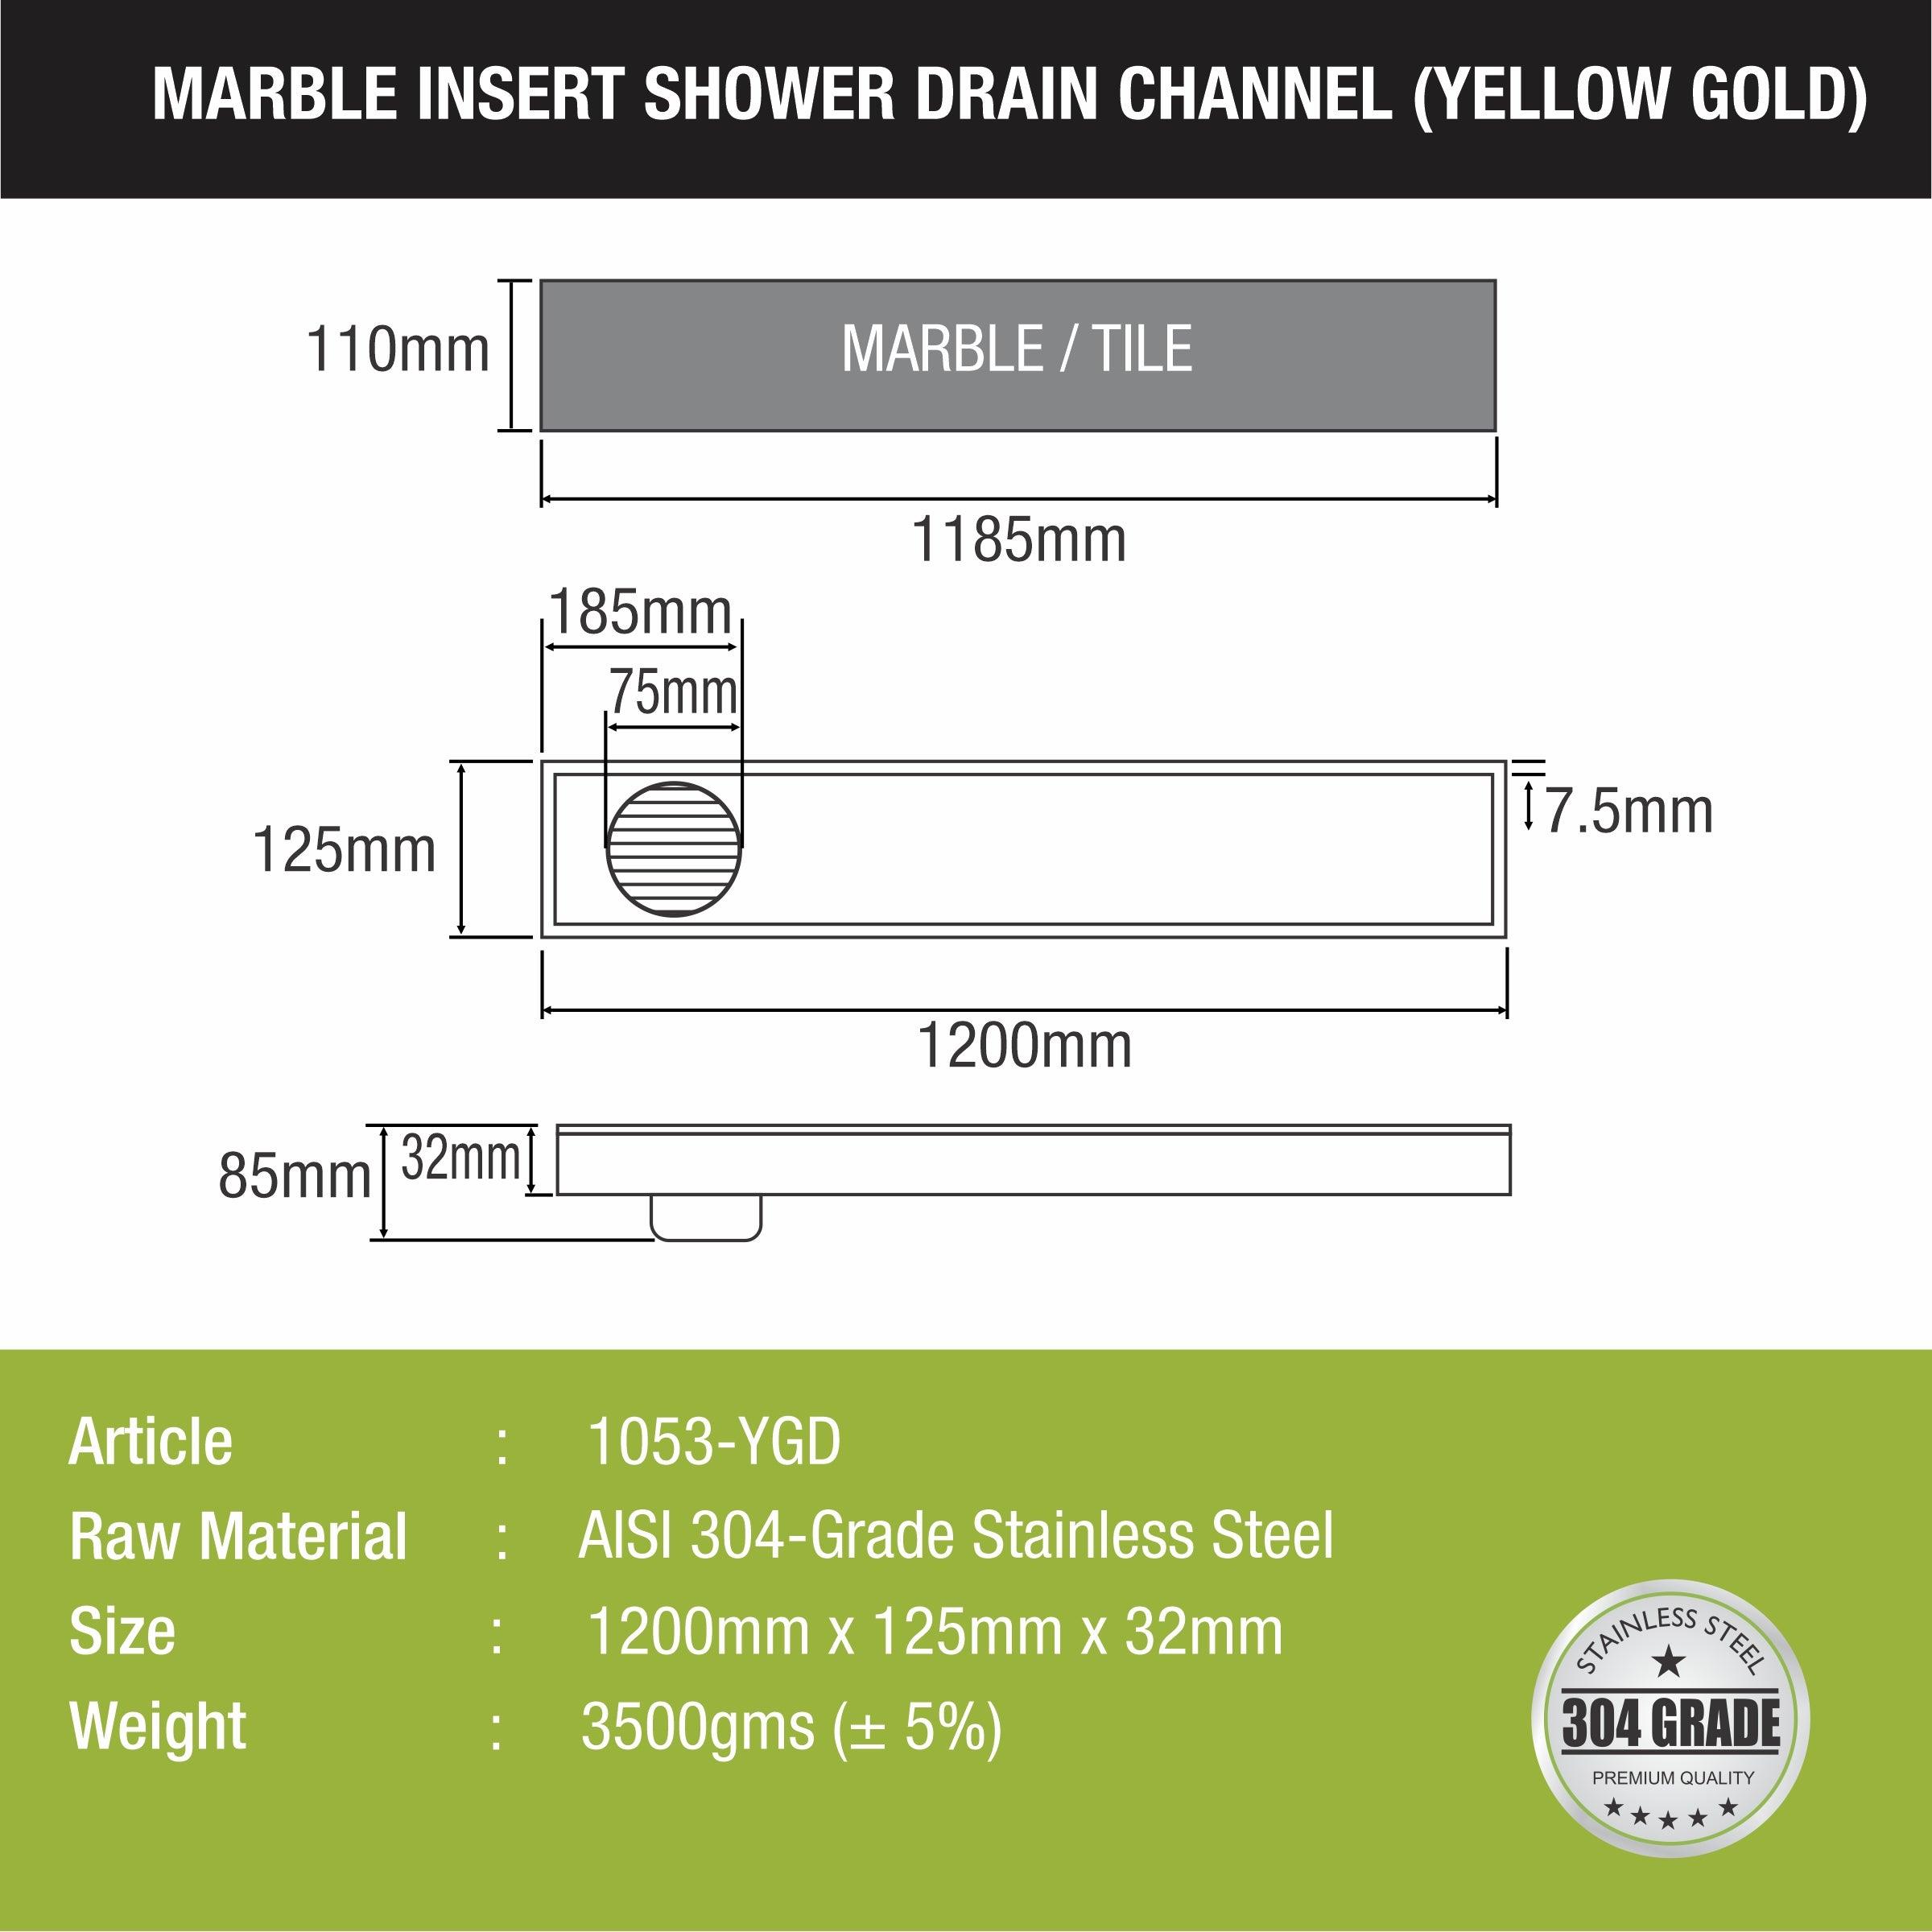 Marble Insert Shower Drain Channel - Yellow Gold (48 x 5 Inches) sizes and dimensions